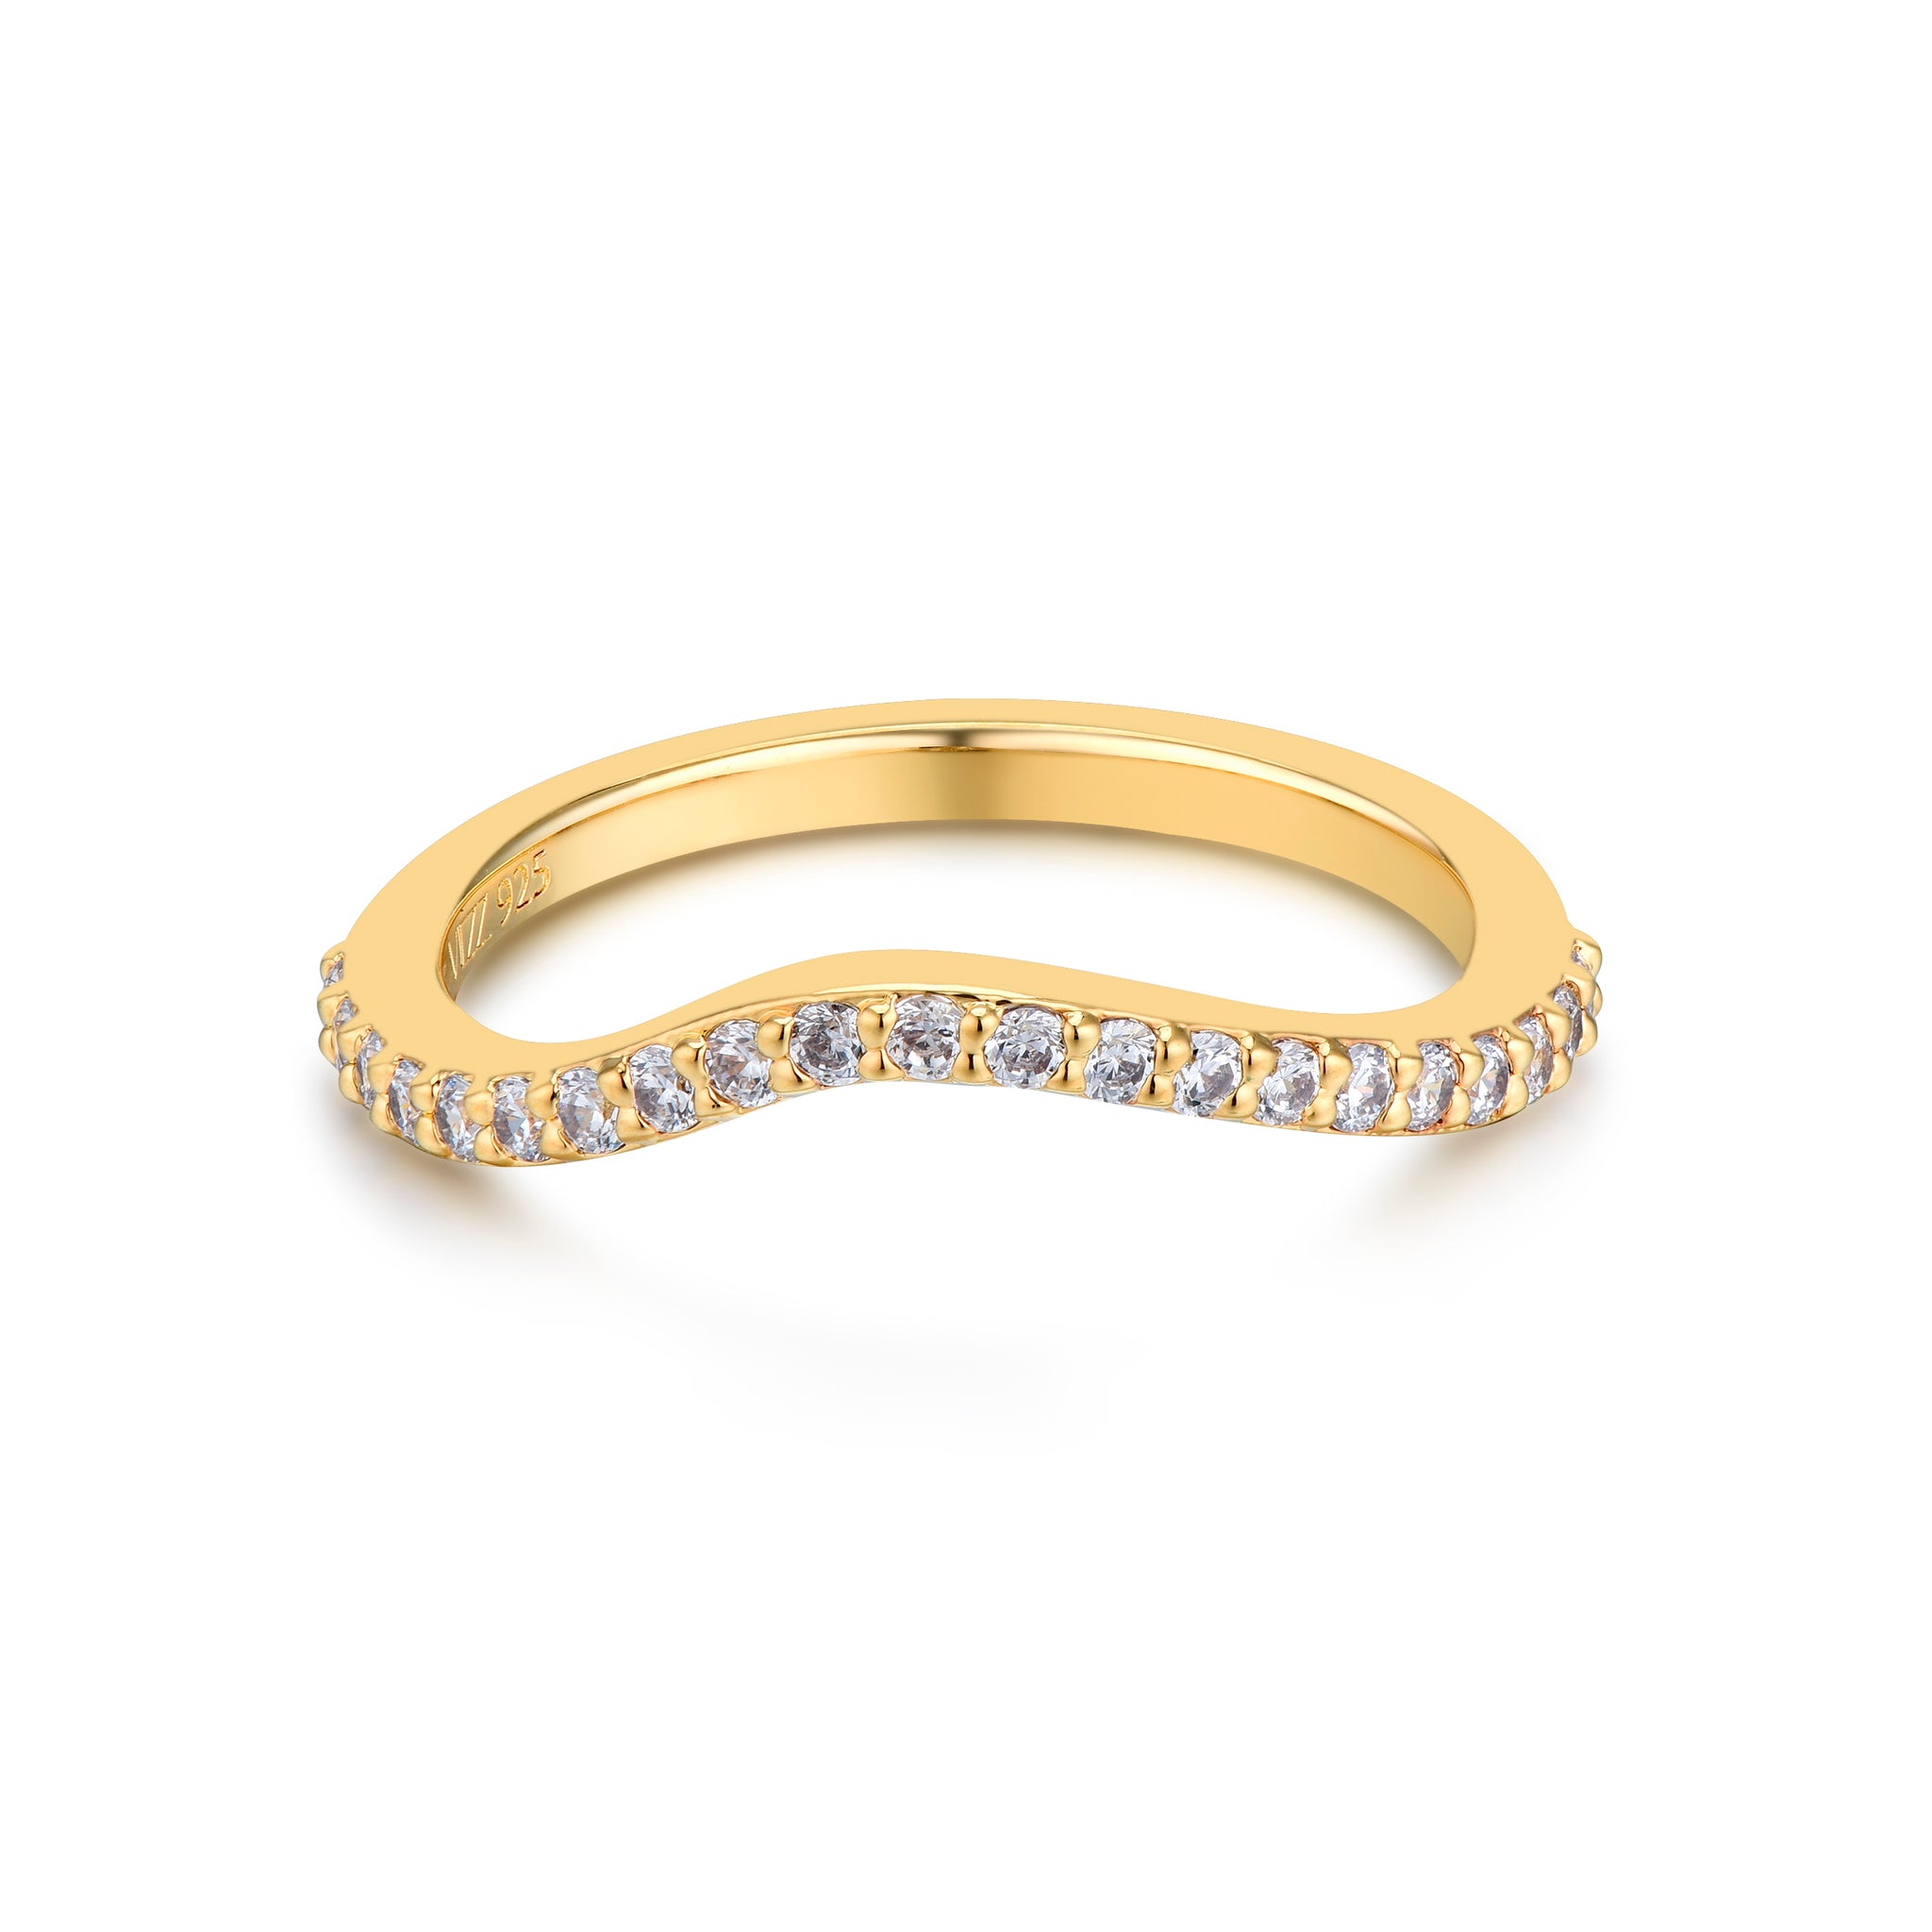 Stacking Ring - 18K recycled gold vermeil on recycled silver and zirconia.